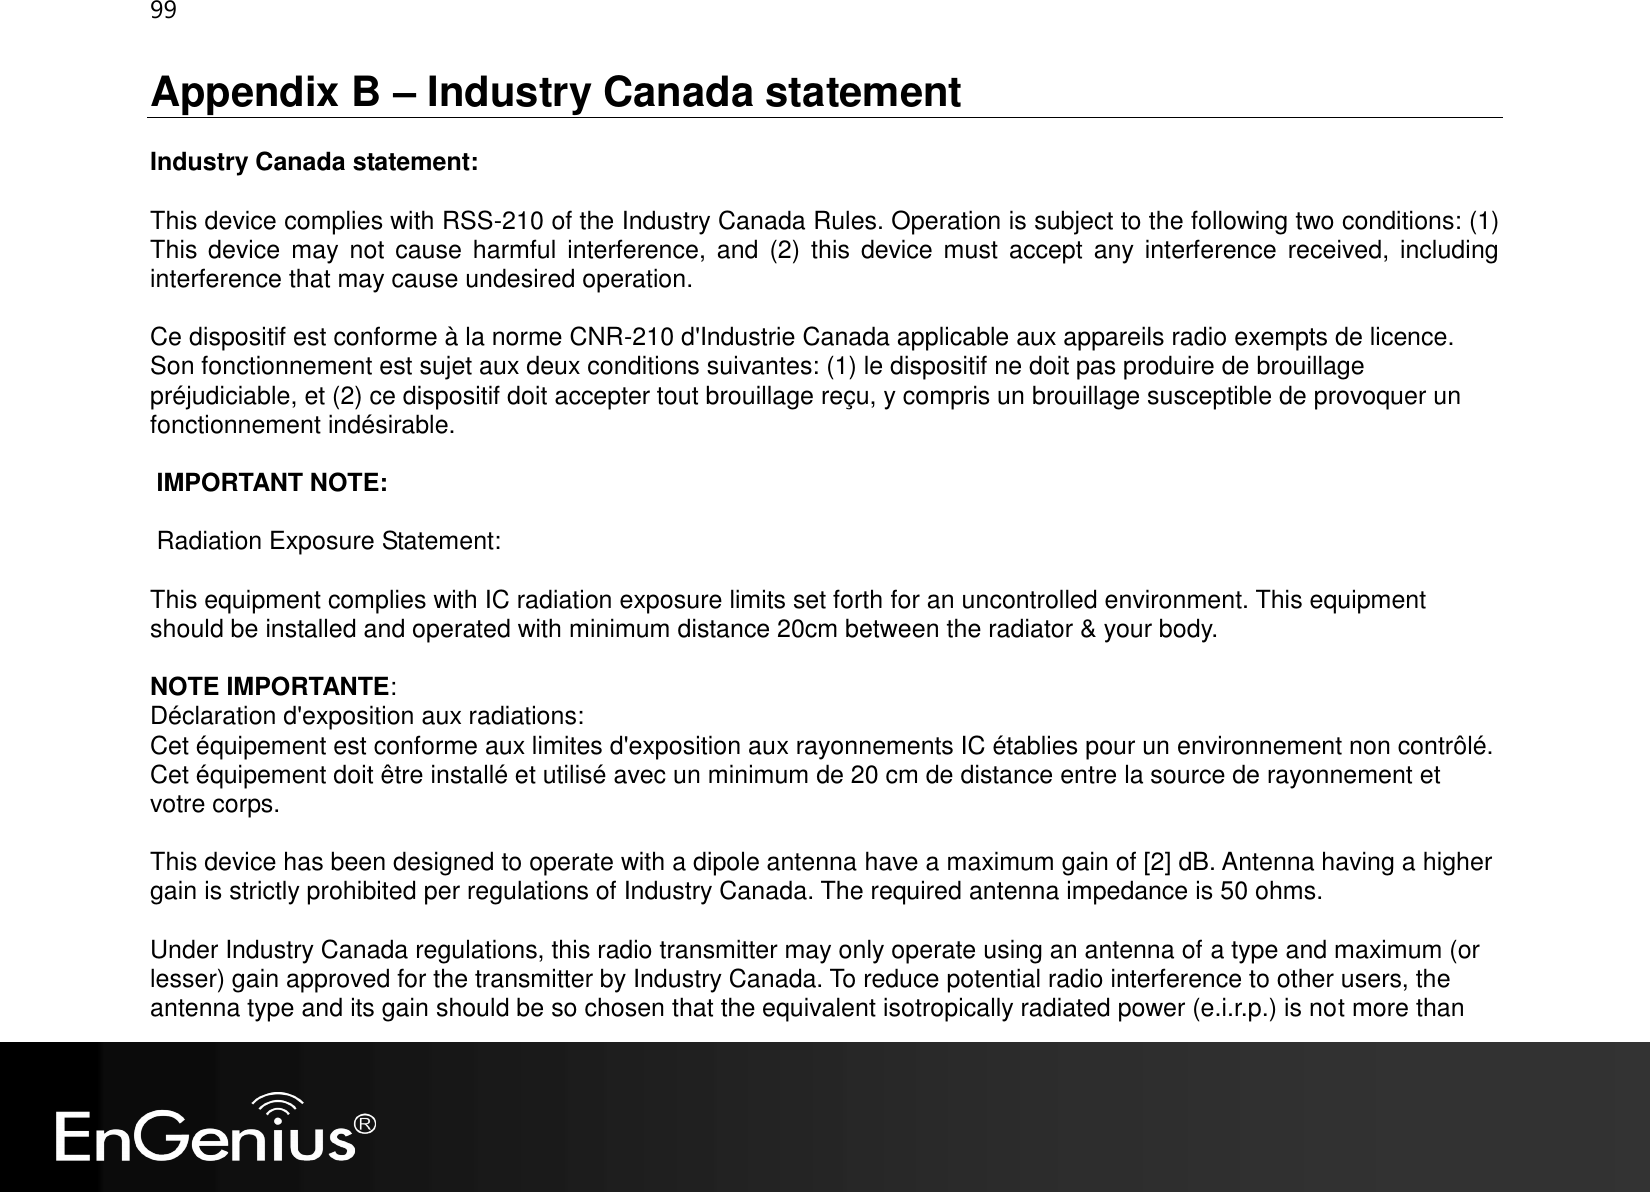 99  Appendix B – Industry Canada statement Industry Canada statement: This device complies with RSS-210 of the Industry Canada Rules. Operation is subject to the following two conditions: (1) This  device  may  not  cause harmful  interference, and  (2)  this  device  must  accept  any  interference received,  including interference that may cause undesired operation. Ce dispositif est conforme à la norme CNR-210 d&apos;Industrie Canada applicable aux appareils radio exempts de licence. Son fonctionnement est sujet aux deux conditions suivantes: (1) le dispositif ne doit pas produire de brouillage préjudiciable, et (2) ce dispositif doit accepter tout brouillage reçu, y compris un brouillage susceptible de provoquer un fonctionnement indésirable.  IMPORTANT NOTE:  Radiation Exposure Statement: This equipment complies with IC radiation exposure limits set forth for an uncontrolled environment. This equipment should be installed and operated with minimum distance 20cm between the radiator &amp; your body. NOTE IMPORTANTE:  Déclaration d&apos;exposition aux radiations: Cet équipement est conforme aux limites d&apos;exposition aux rayonnements IC établies pour un environnement non contrôlé. Cet équipement doit être installé et utilisé avec un minimum de 20 cm de distance entre la source de rayonnement et votre corps.  This device has been designed to operate with a dipole antenna have a maximum gain of [2] dB. Antenna having a higher gain is strictly prohibited per regulations of Industry Canada. The required antenna impedance is 50 ohms. Under Industry Canada regulations, this radio transmitter may only operate using an antenna of a type and maximum (or lesser) gain approved for the transmitter by Industry Canada. To reduce potential radio interference to other users, the antenna type and its gain should be so chosen that the equivalent isotropically radiated power (e.i.r.p.) is not more than 